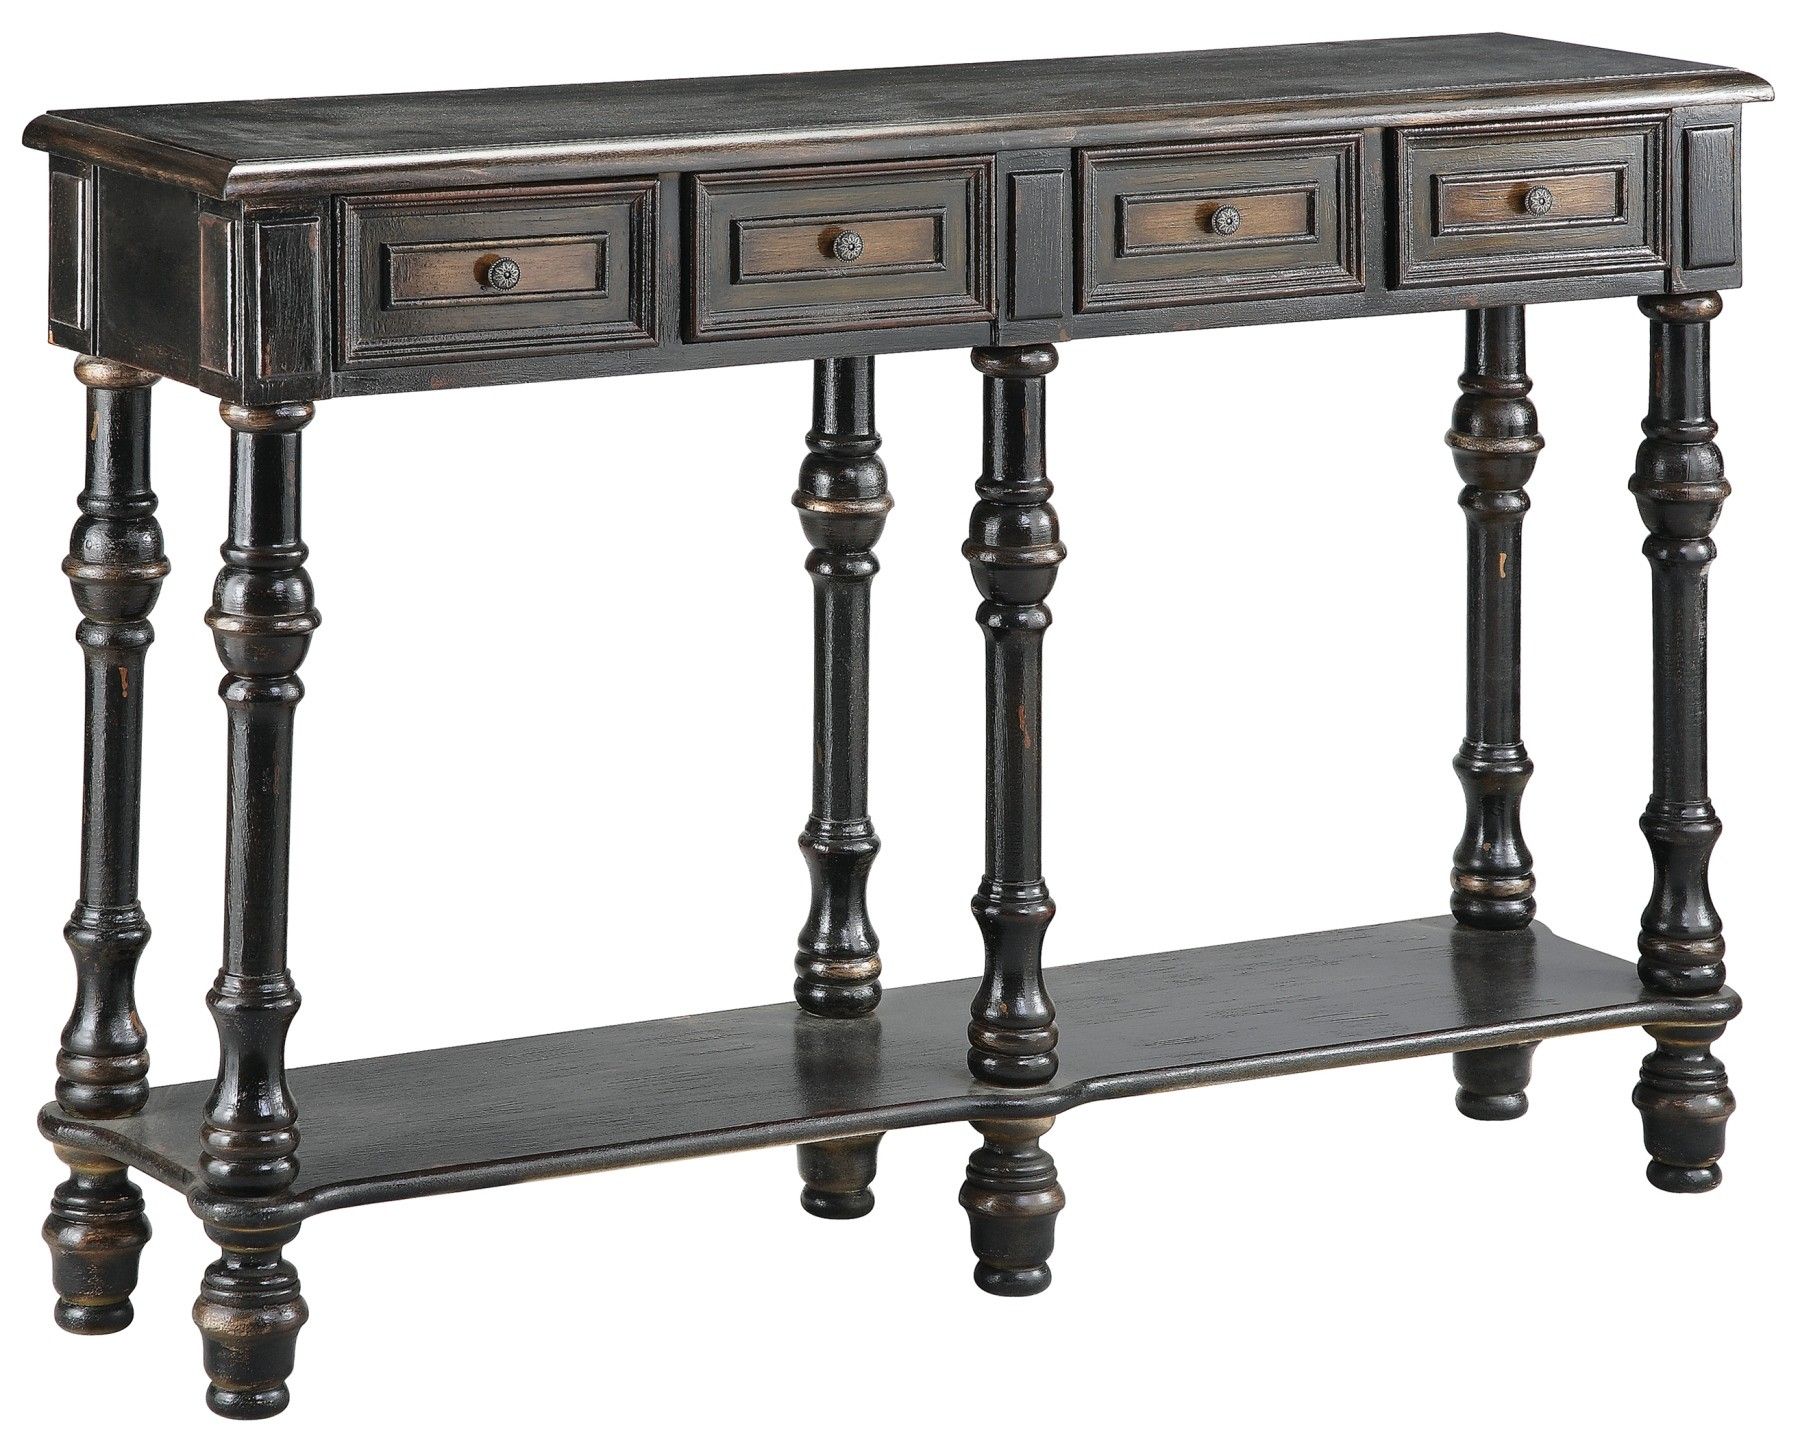 Console Table In Black/brown, 28314, Stein World For Black Console Tables (View 7 of 20)